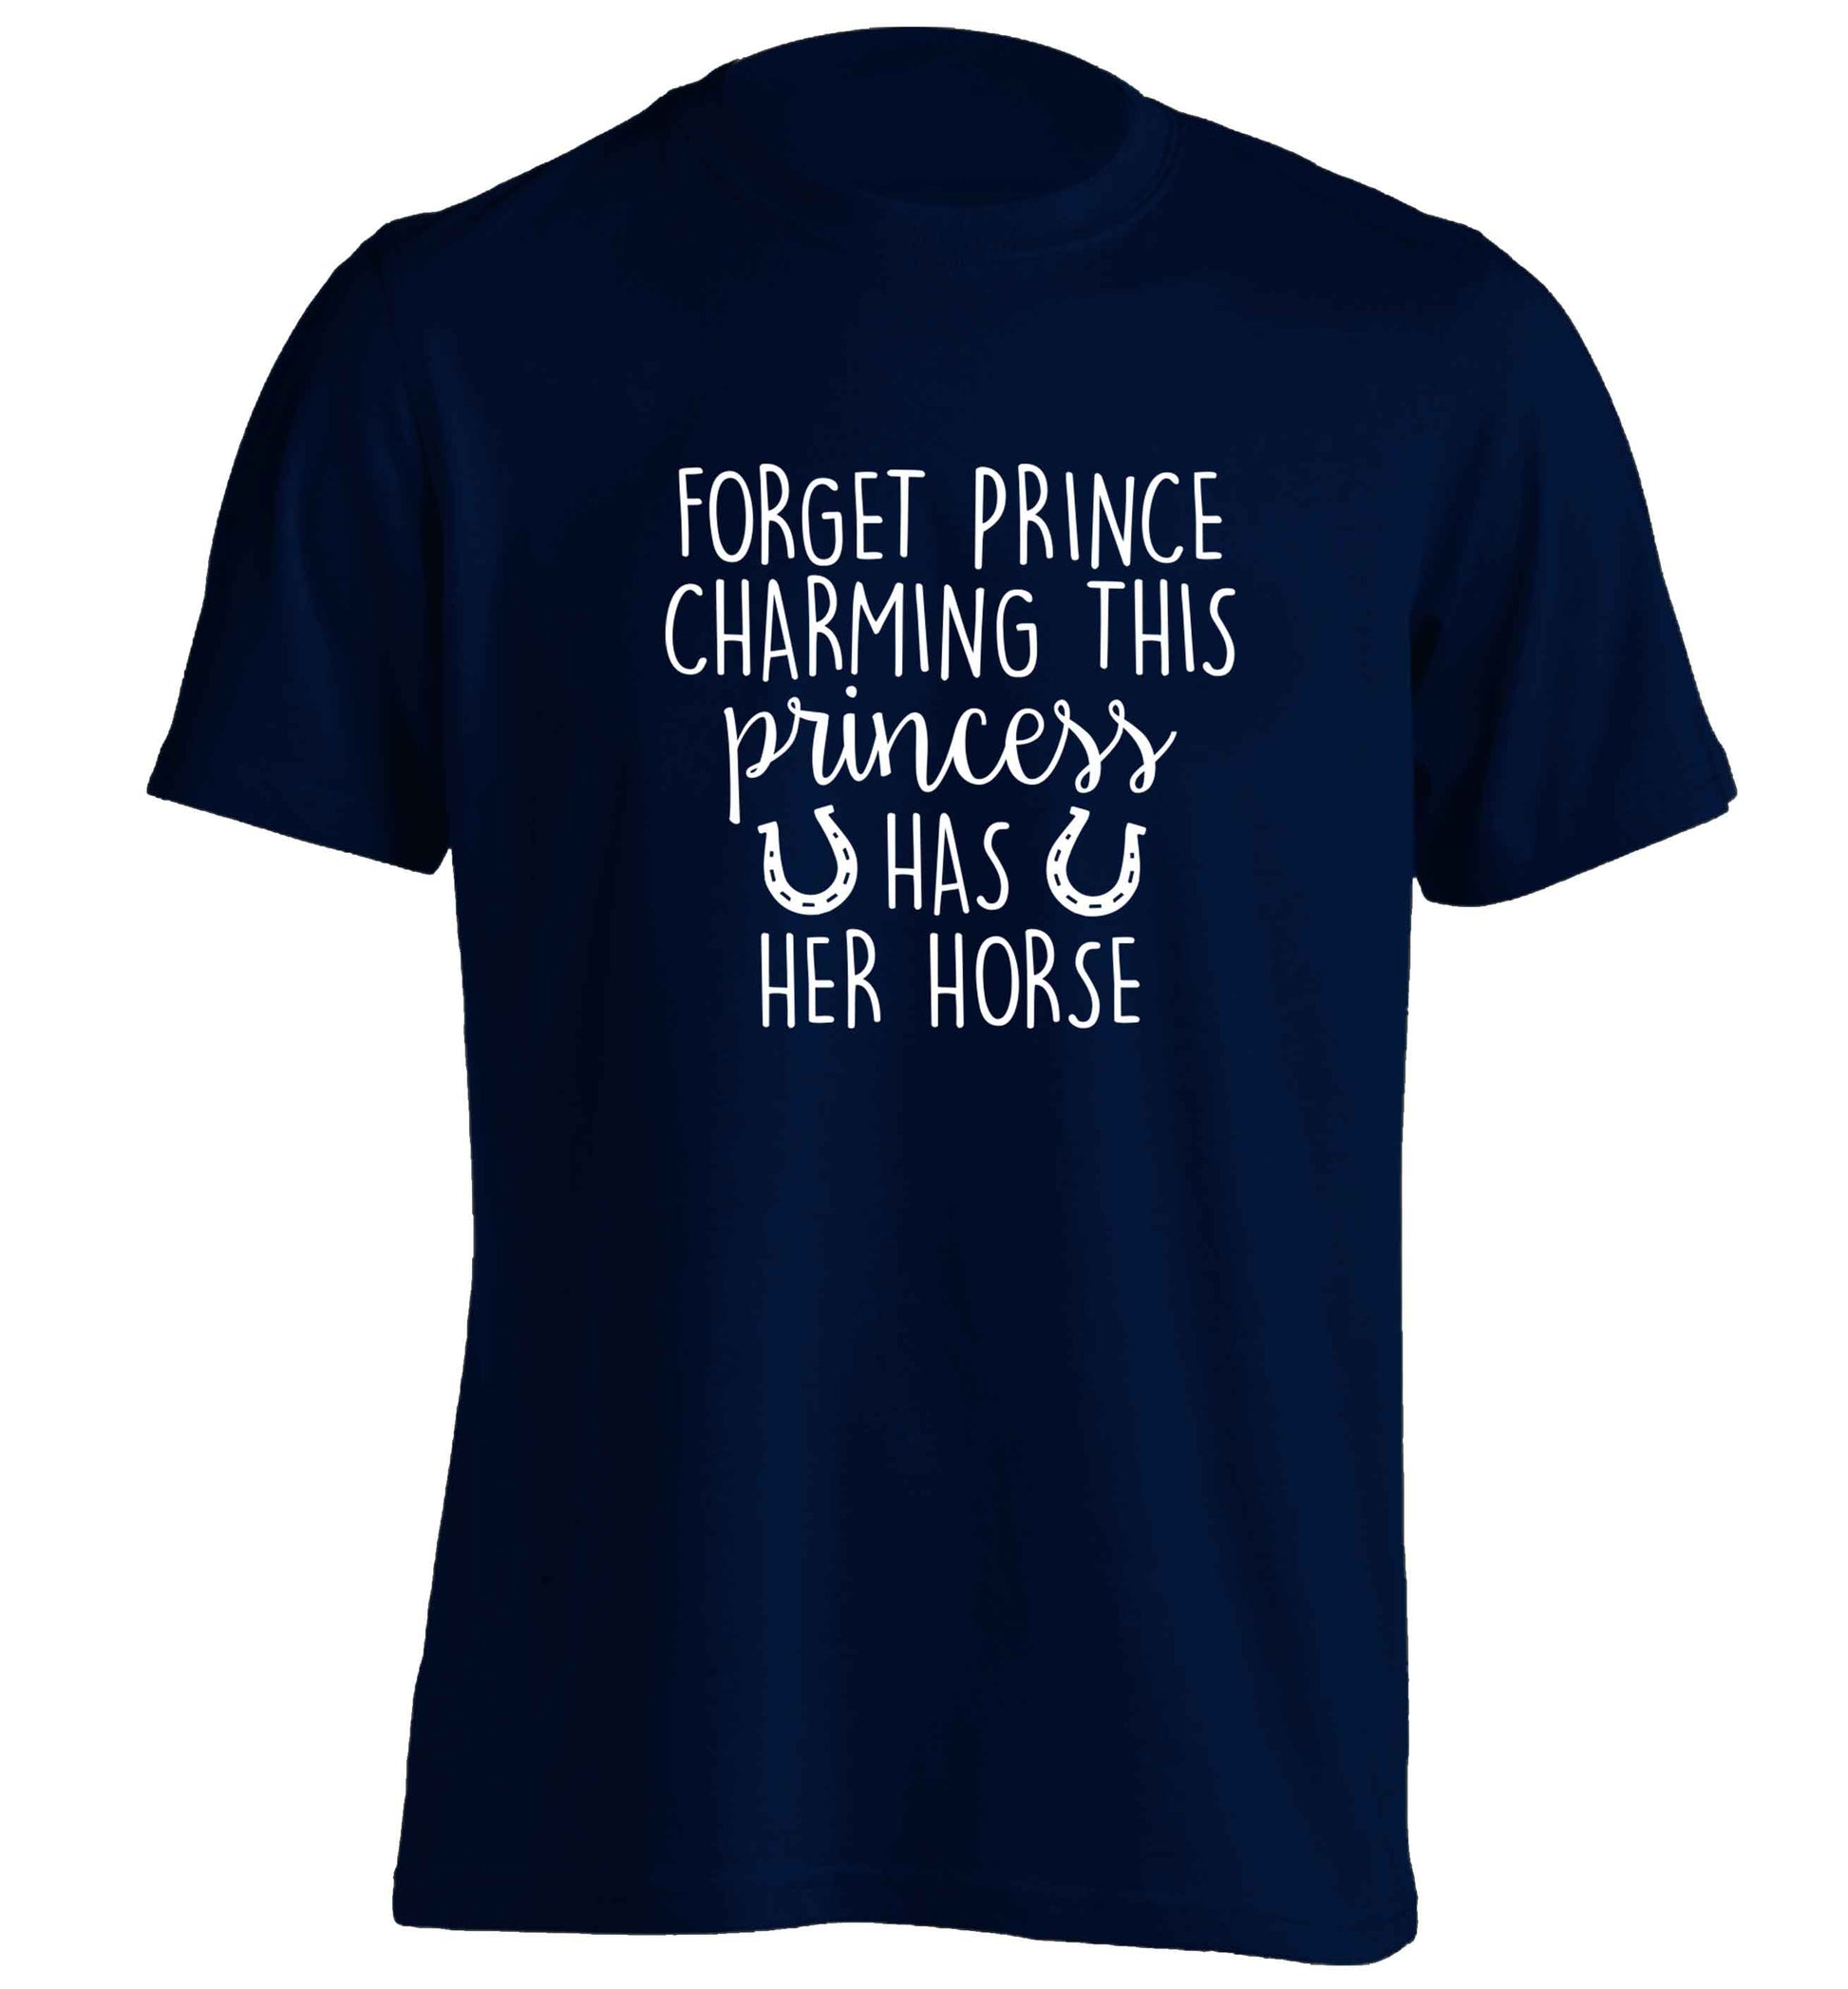 Forget prince charming this princess has her horse adults unisex navy Tshirt 2XL